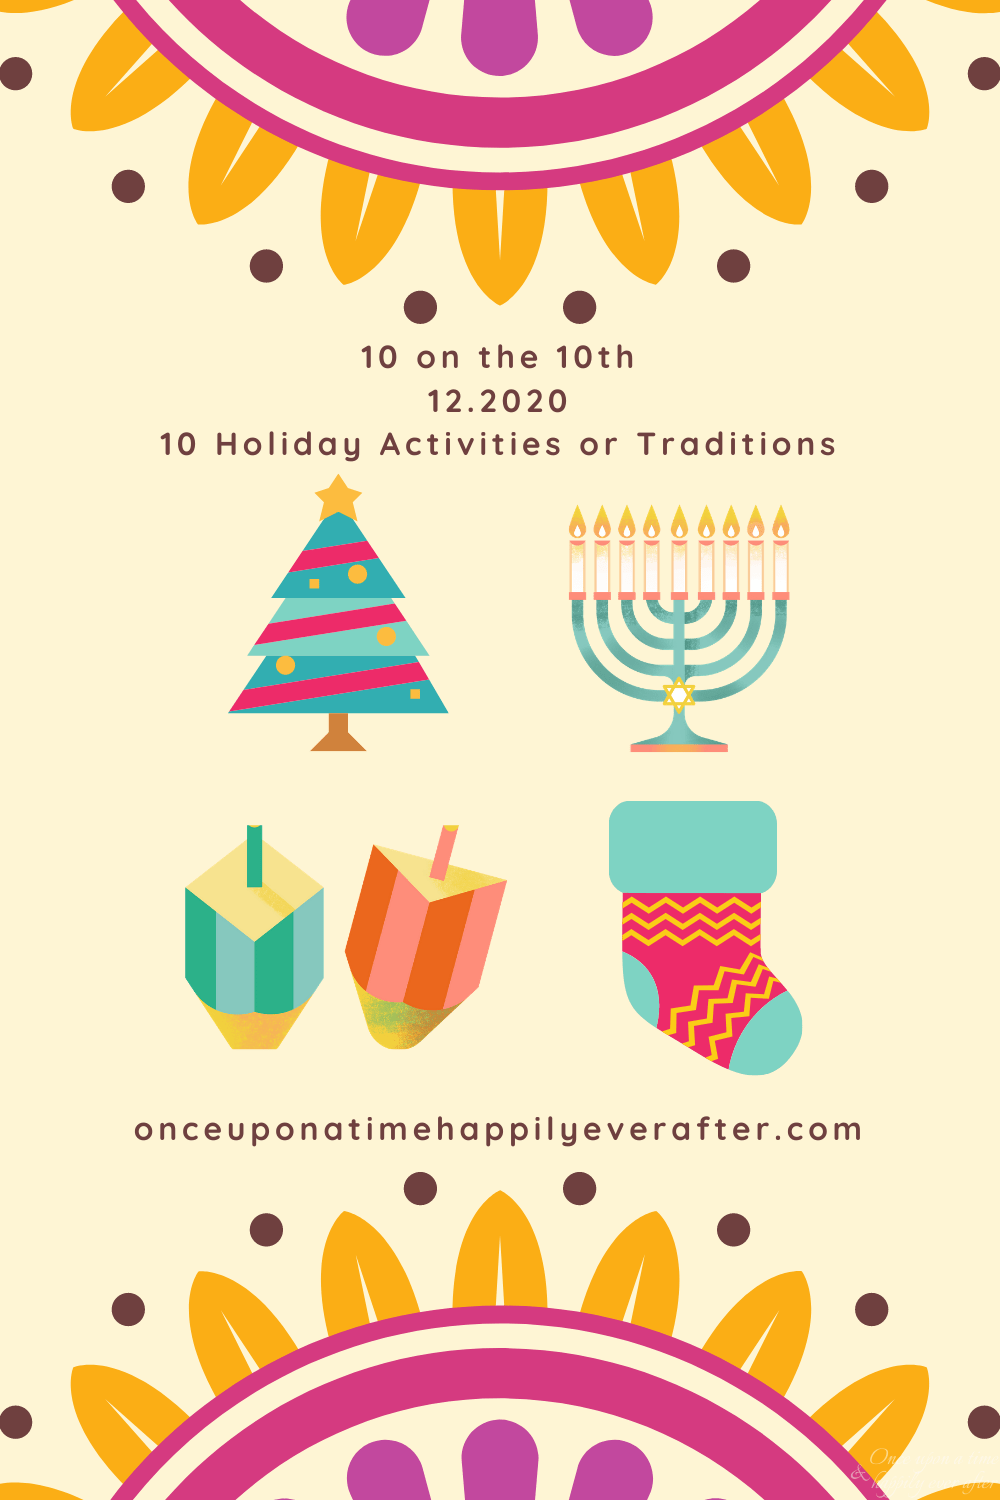 10 on the 10th 12.2020: 10 Holiday Traditions